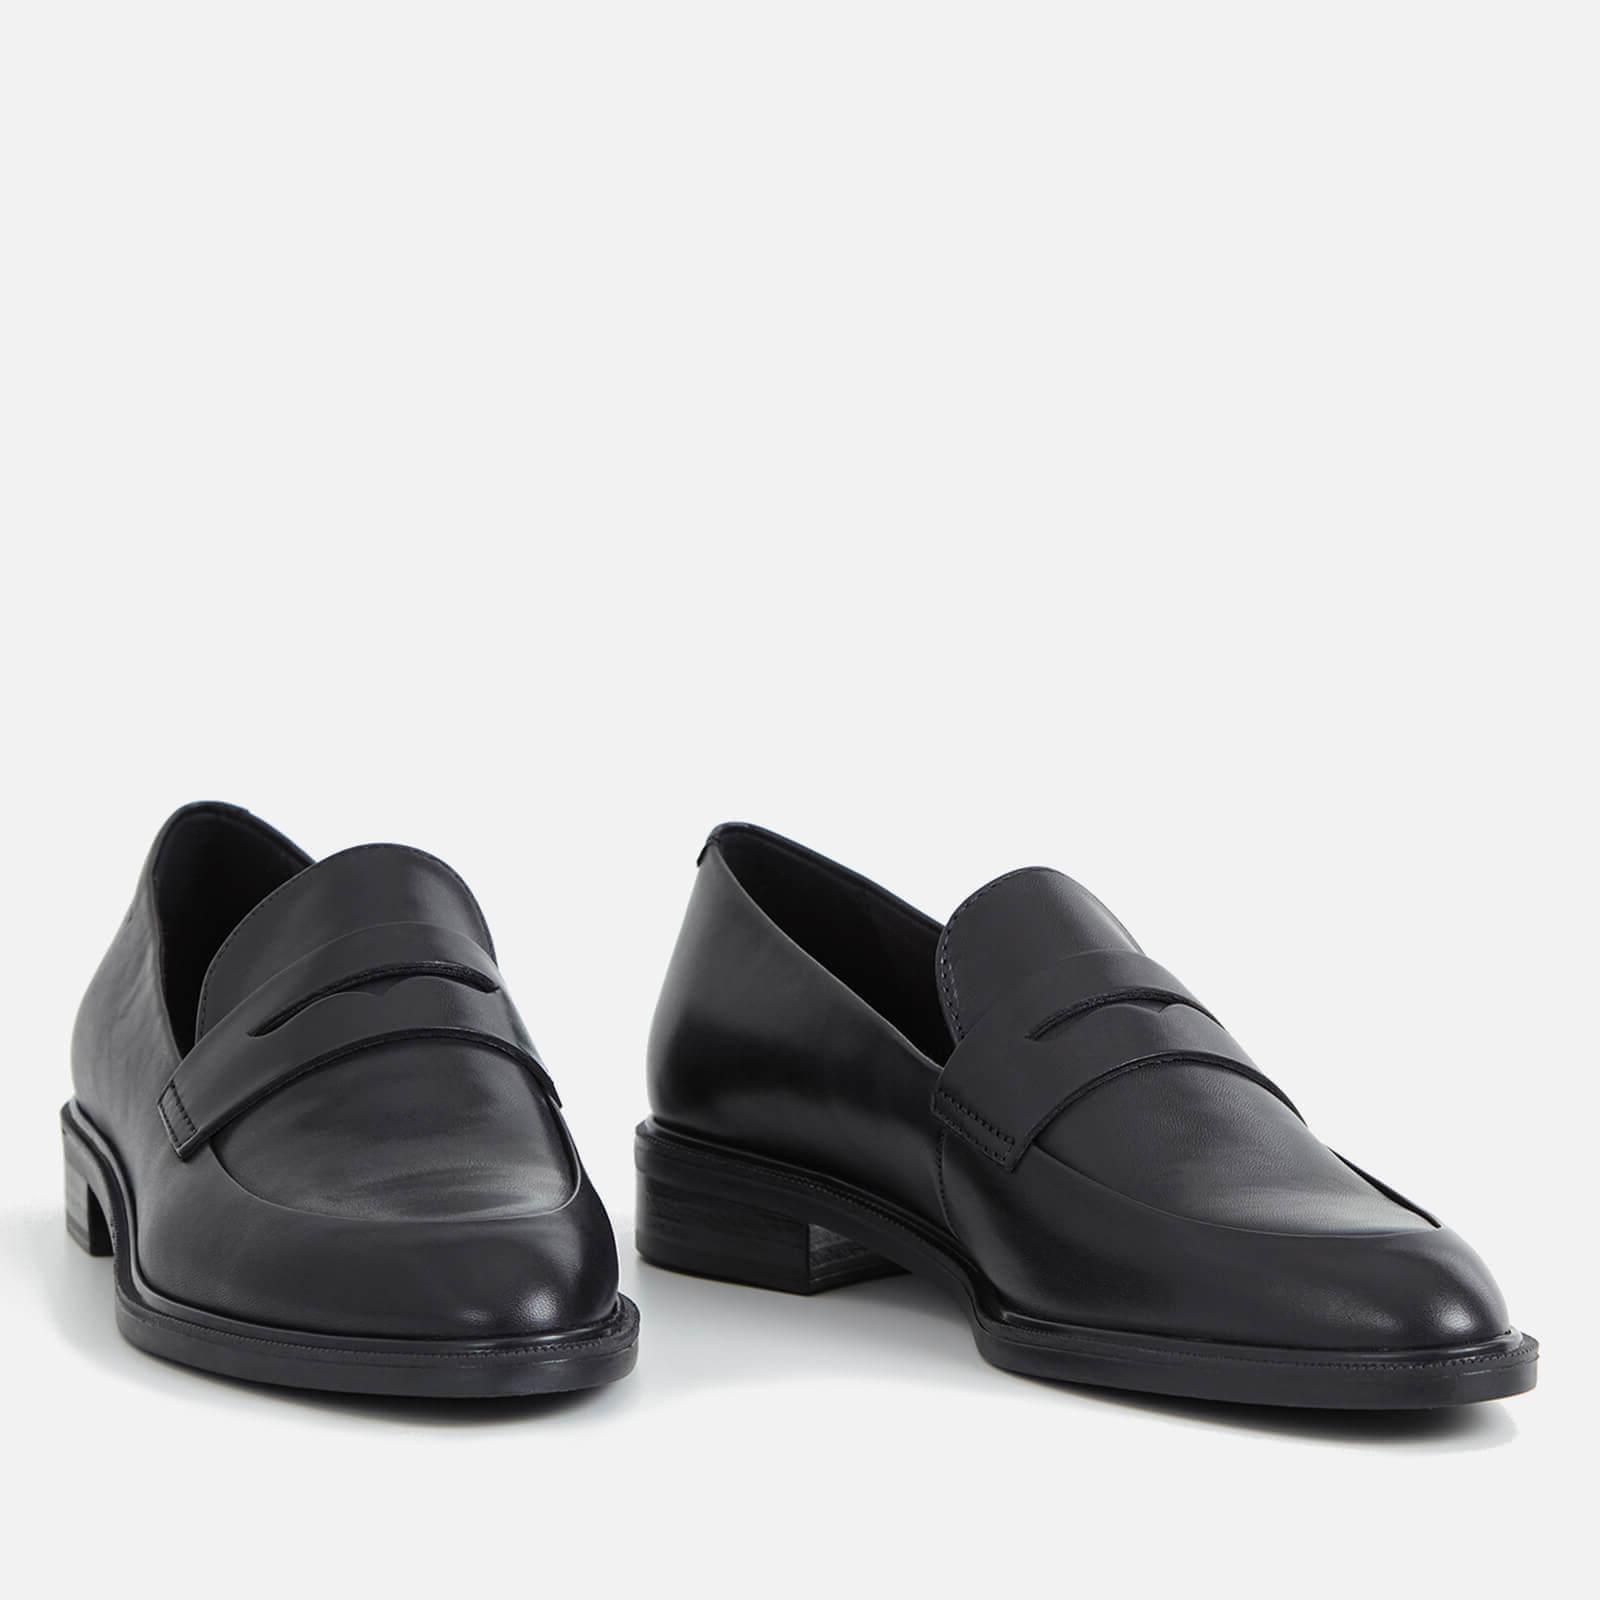 arve Kosciuszko acceleration Vagabond Shoemakers Frances Leather Loafers in Black | Lyst